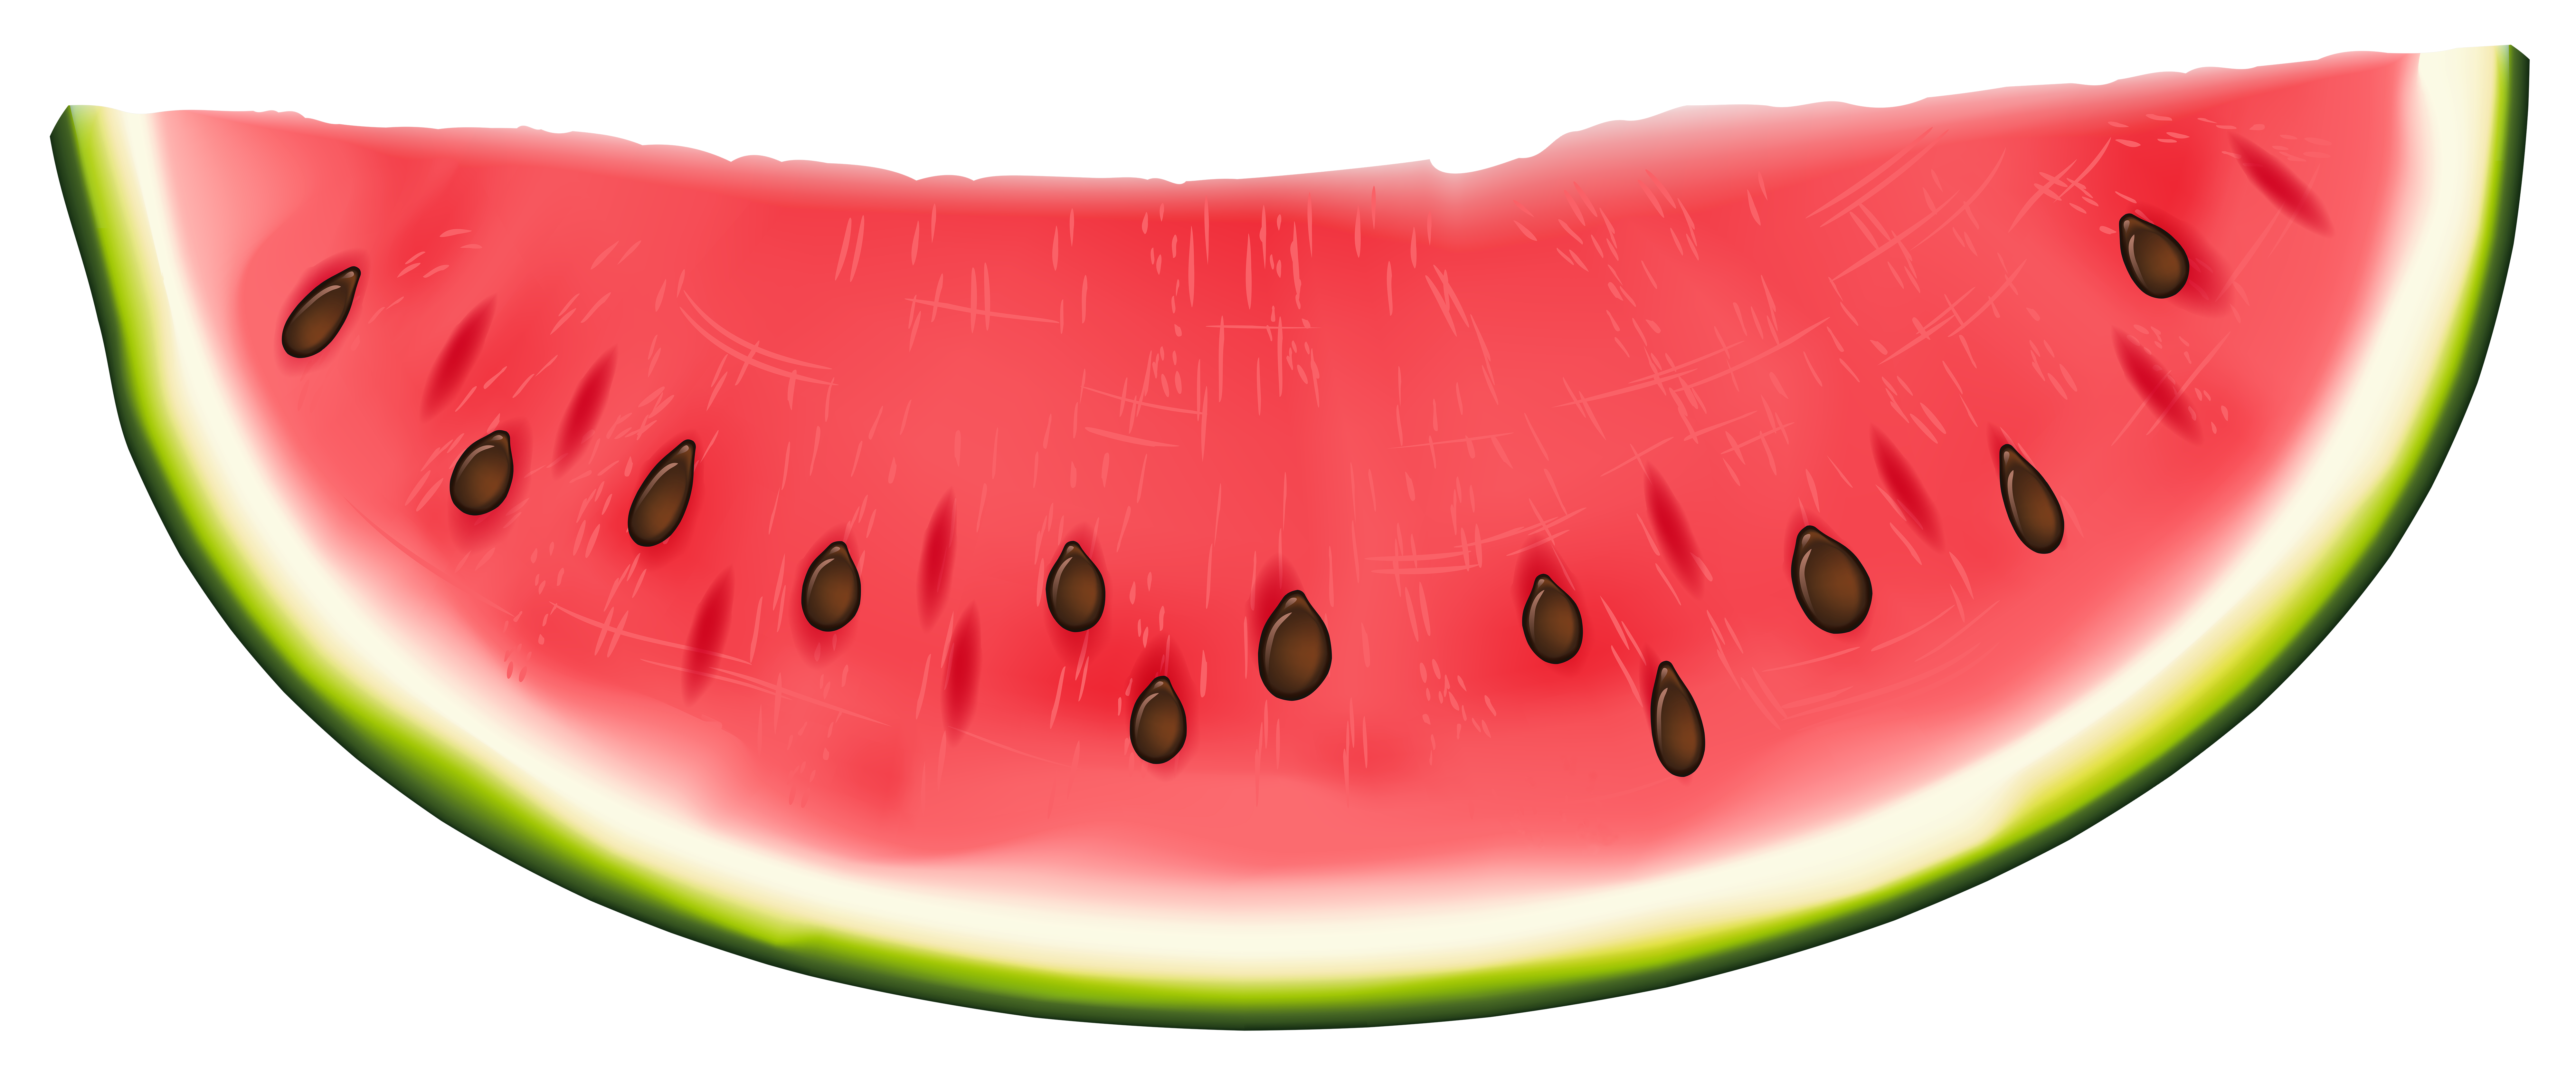 Watermelon clipart for.